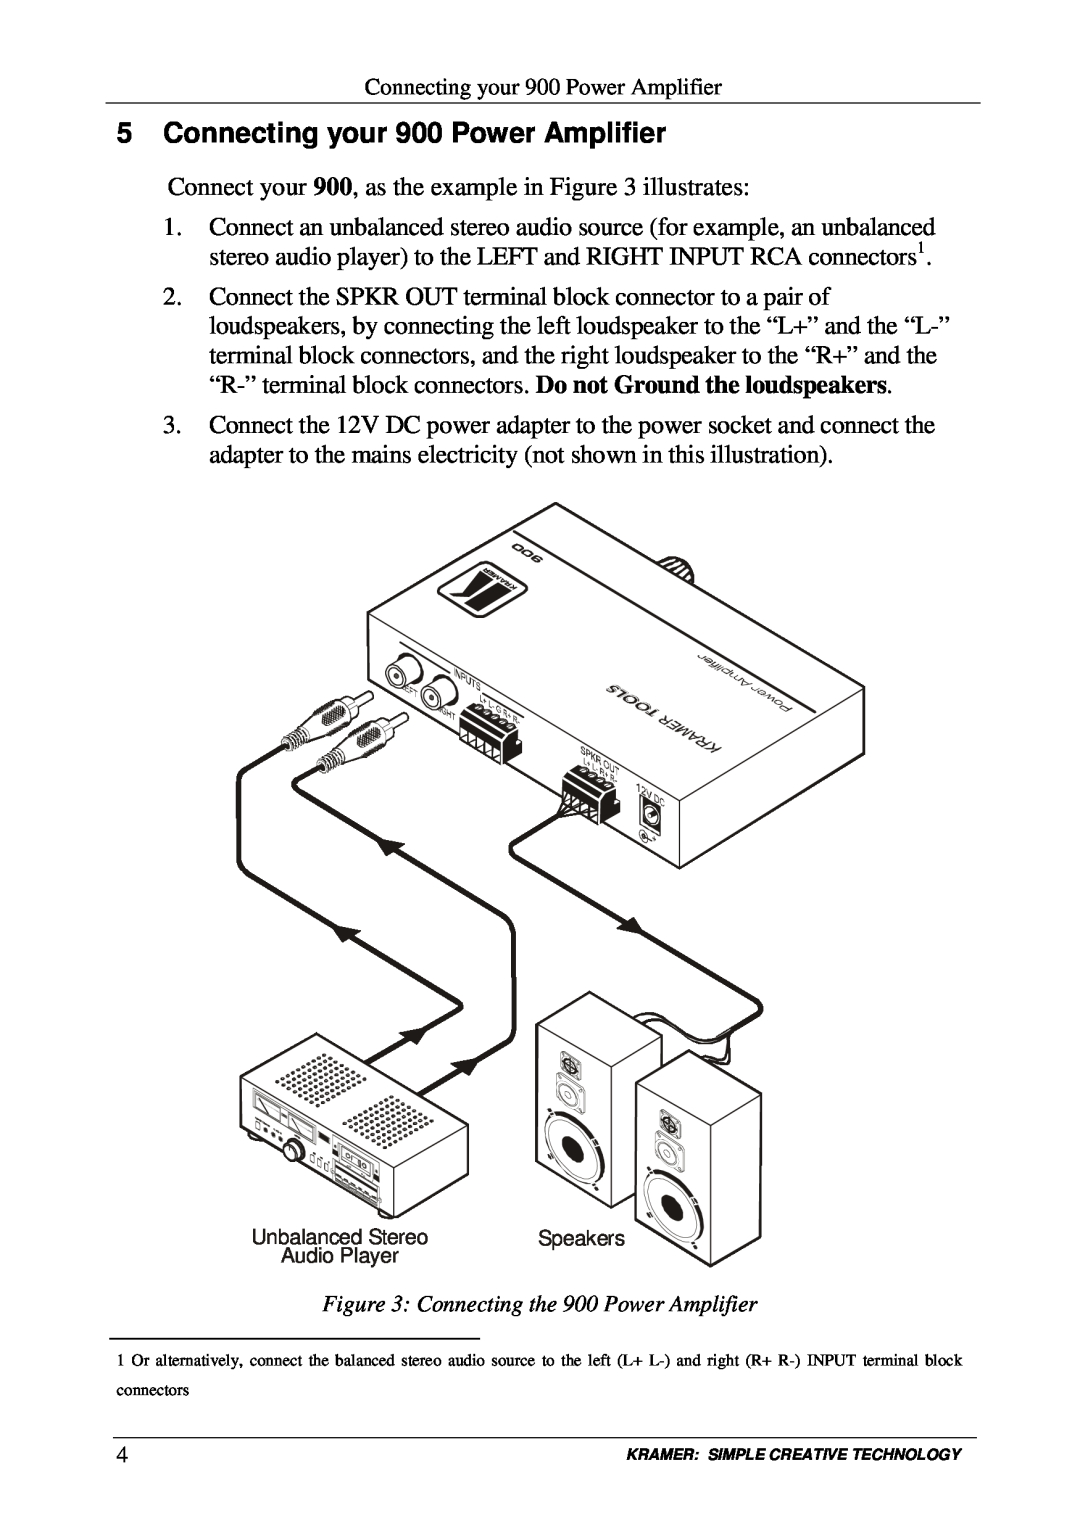 Kramer Electronics user manual Connecting your 900 Power Amplifier 